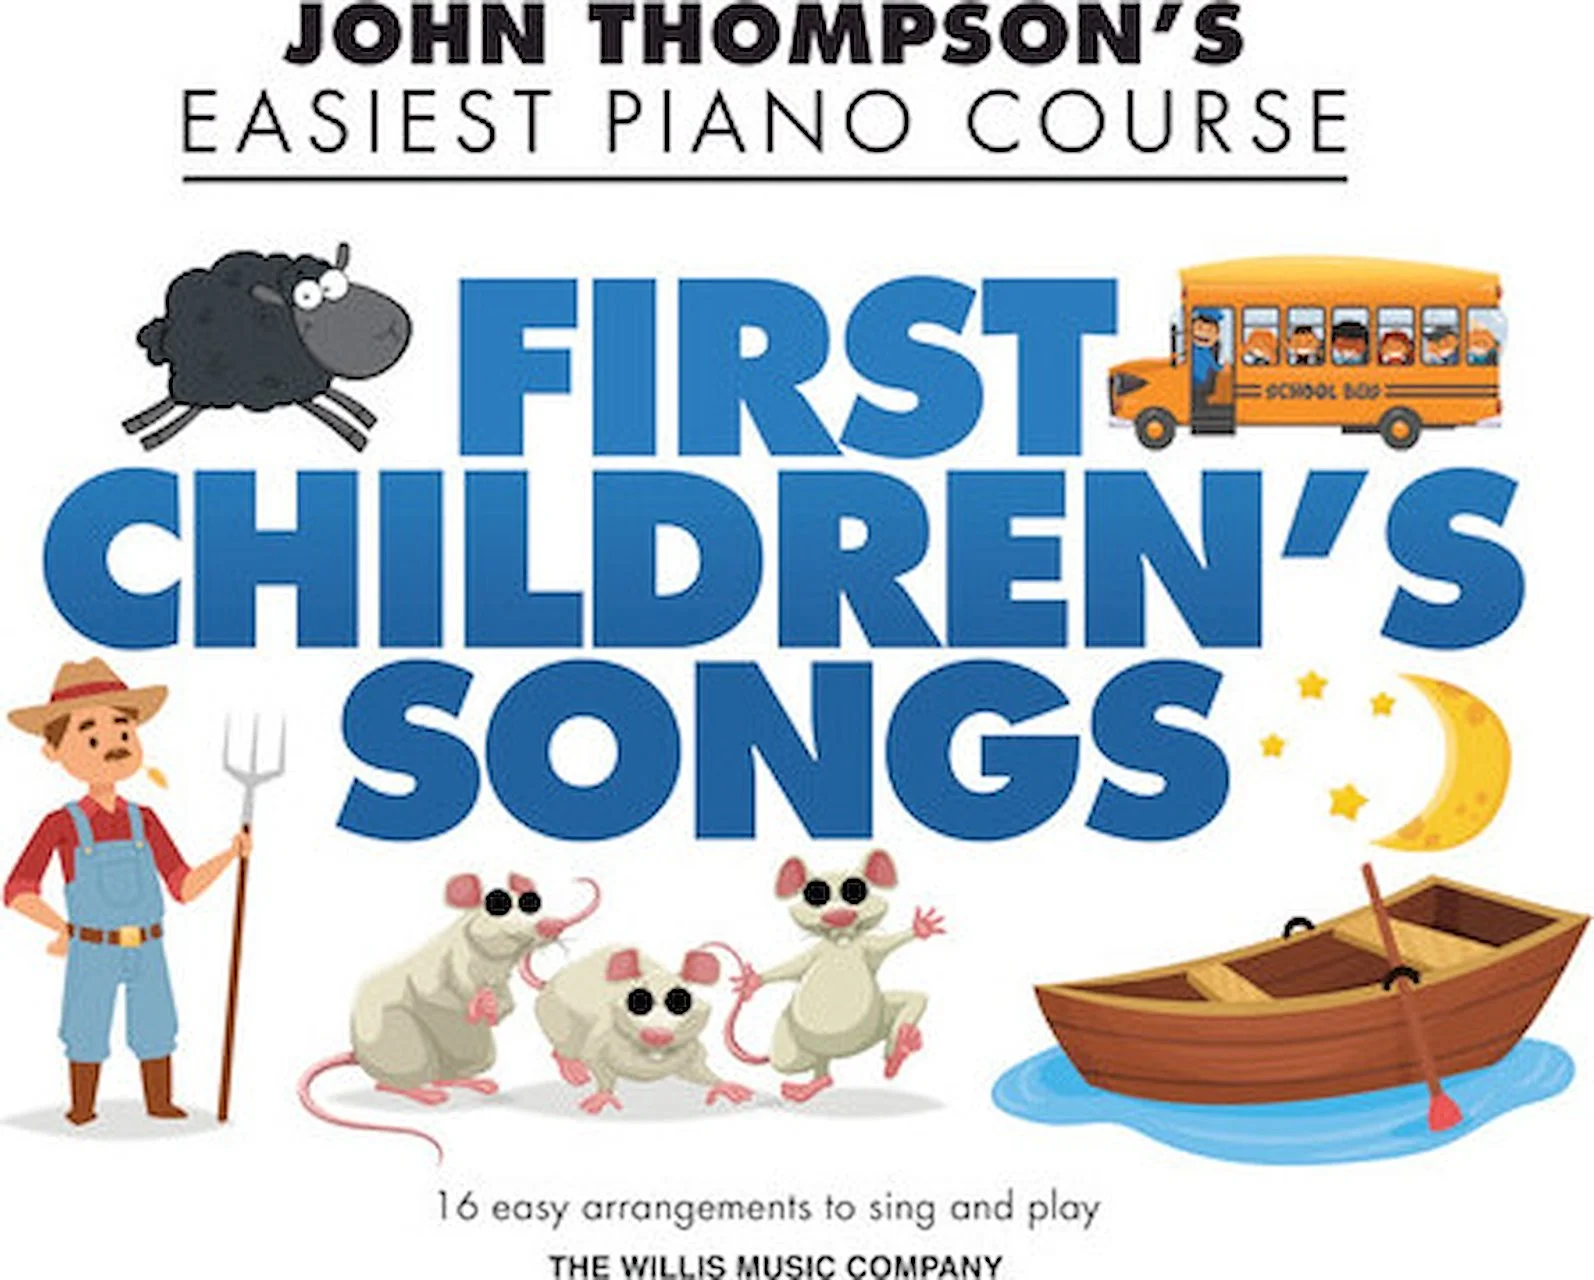 First Classical Duets John Thompson's Easiest Piano Course 